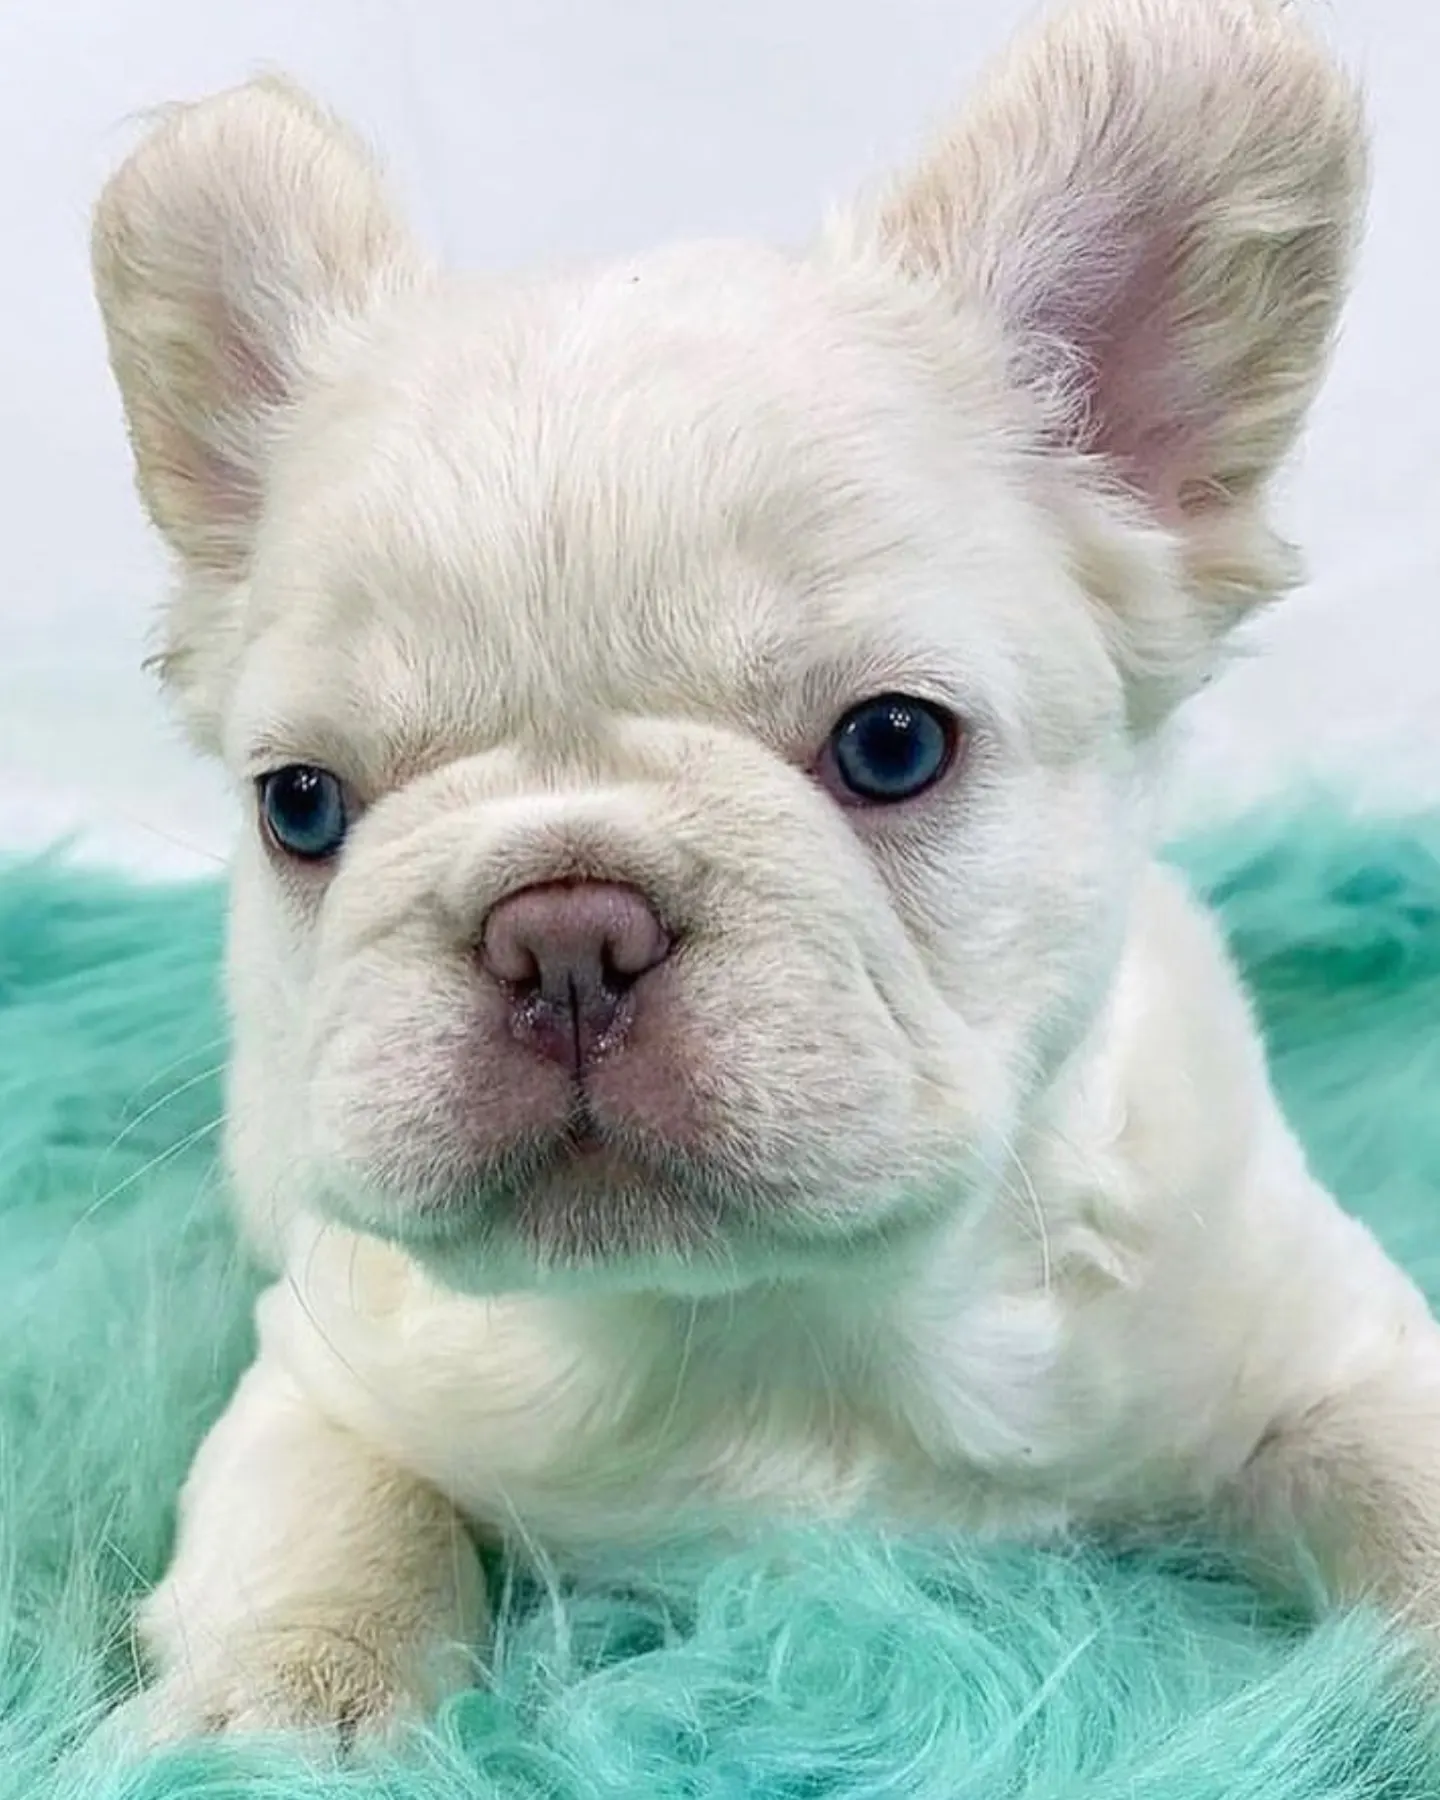 The owner of a whitr fluffy frenchie wondering about the fluffy french bulldog health and lifespan